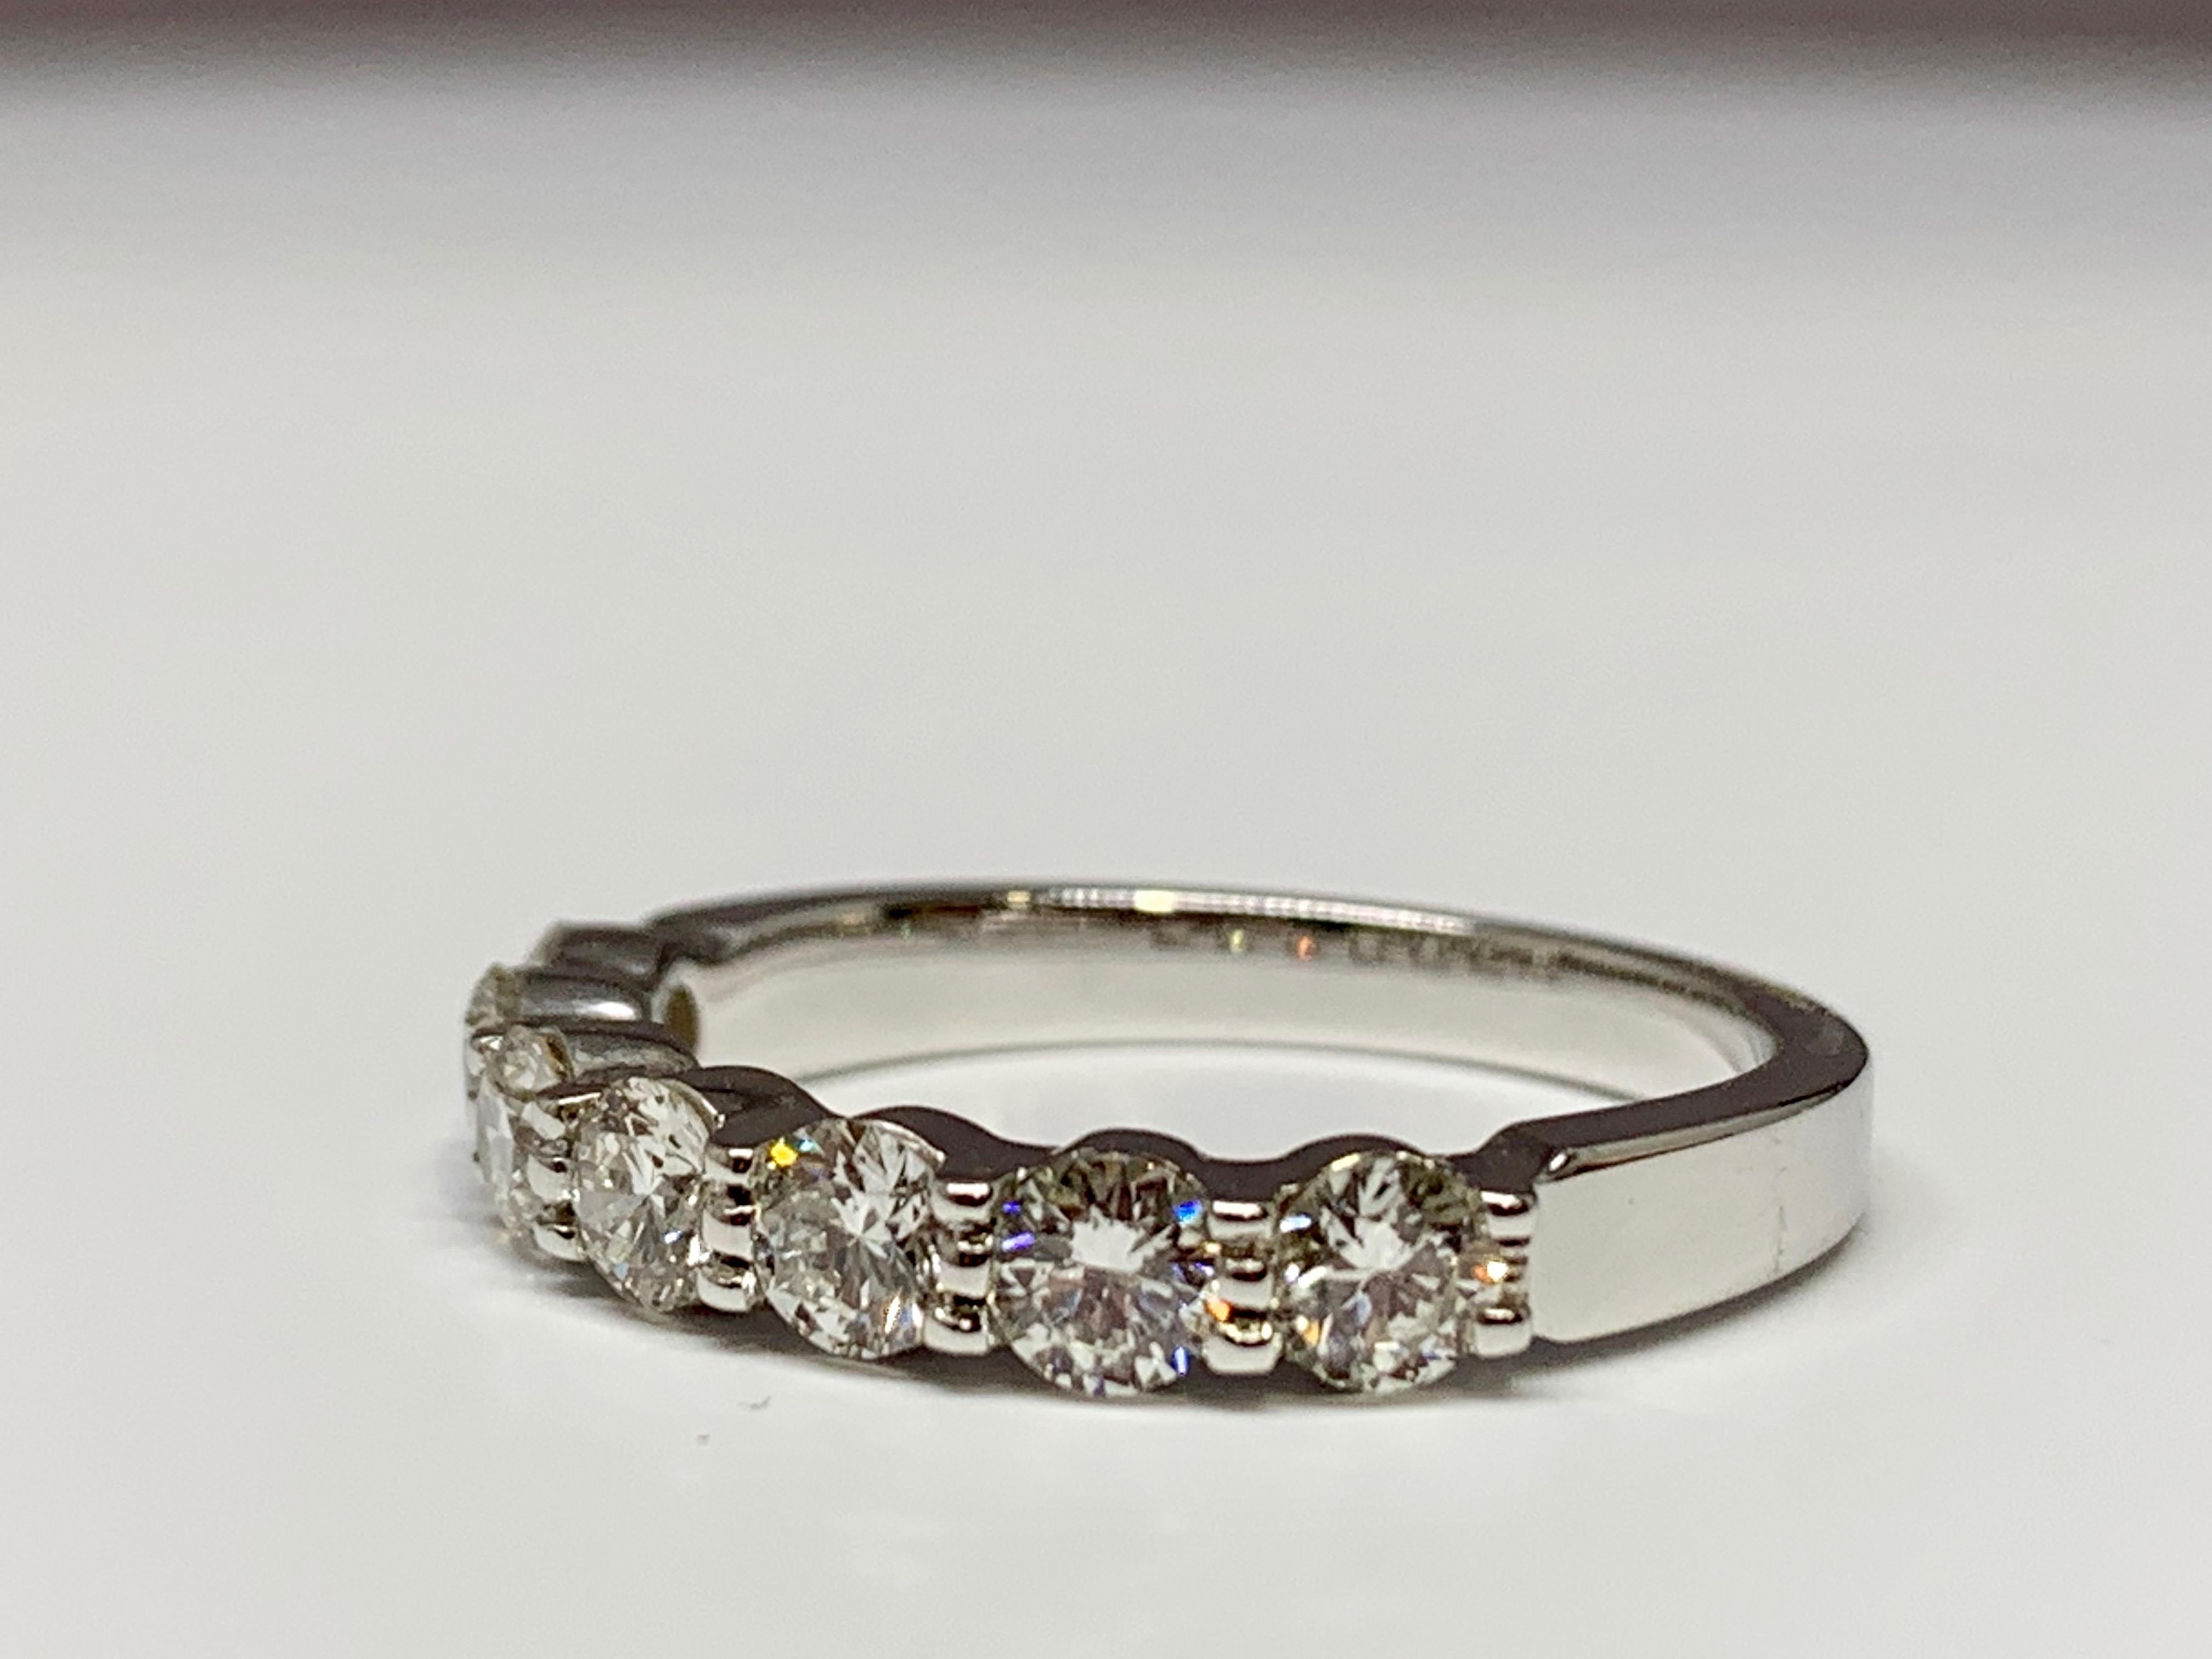 This classic shared-prong wedding band features 7 diamonds that total 1 carat in weight. This diamonds have a clarity grade between VS2-SI1 and a color grade of H. This wedding band is currently a size 6.5 but can be resized upon request! 